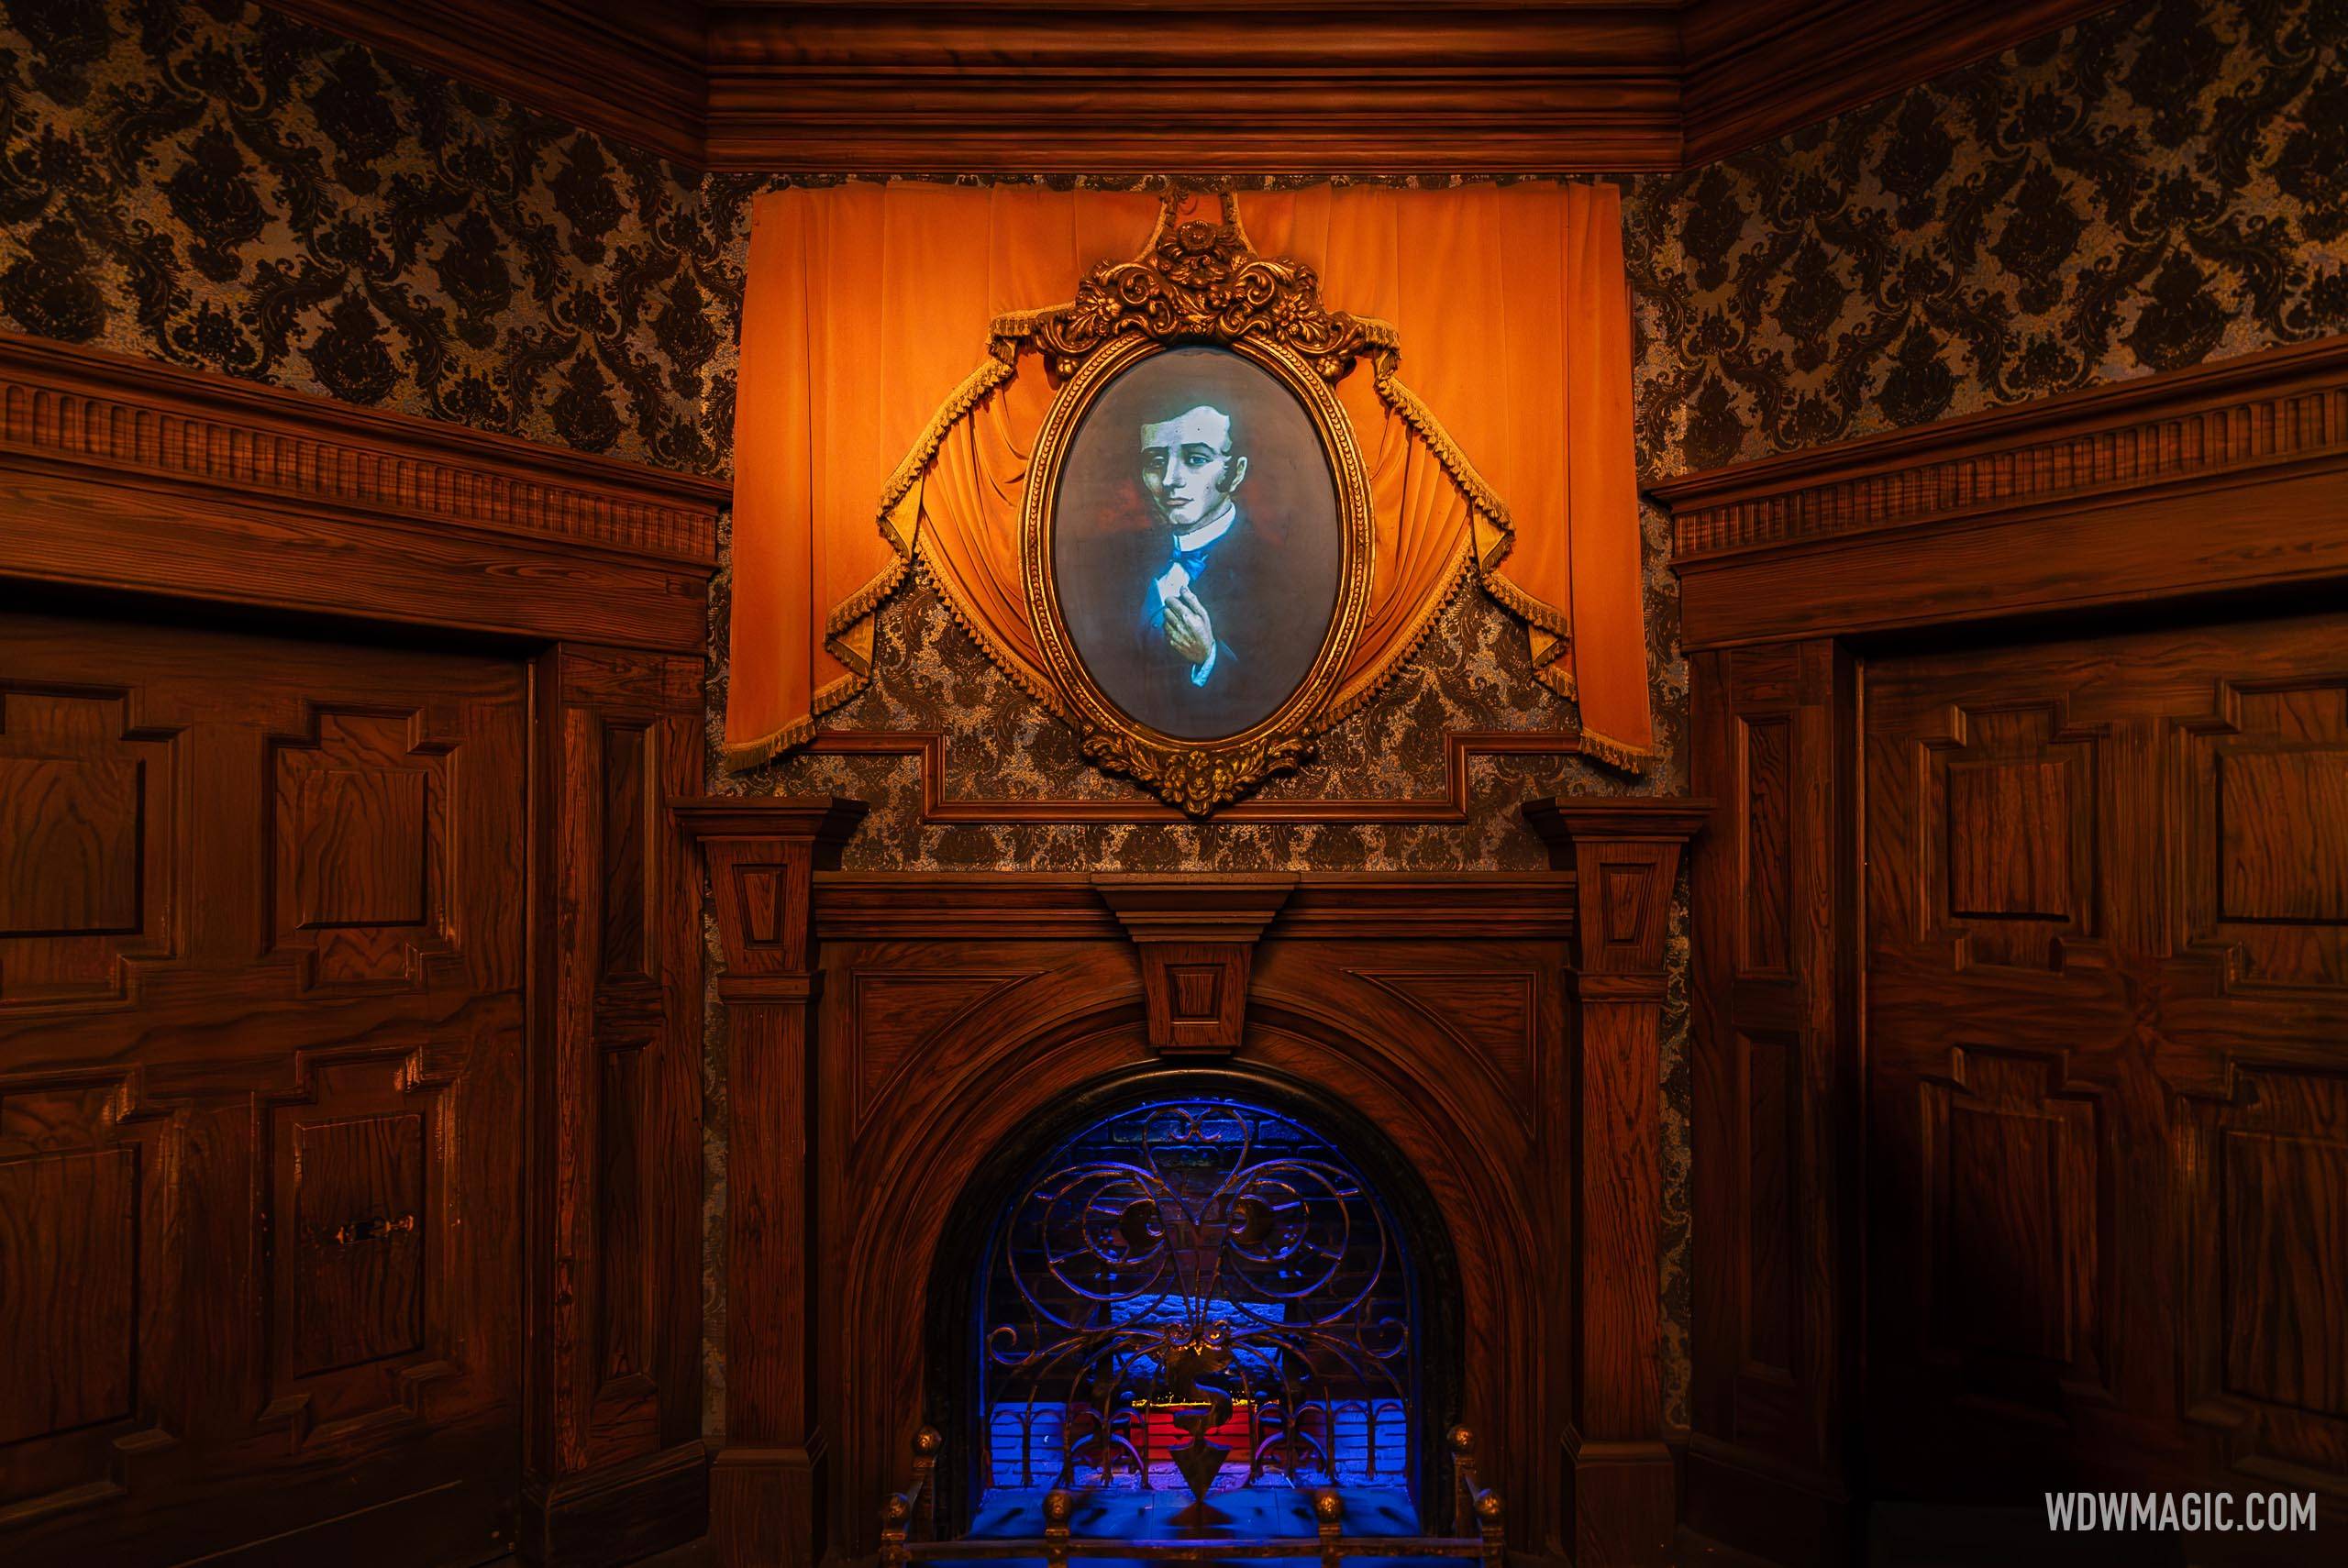 Interactive queue elements and more enhancements now being added to the Haunted Mansion